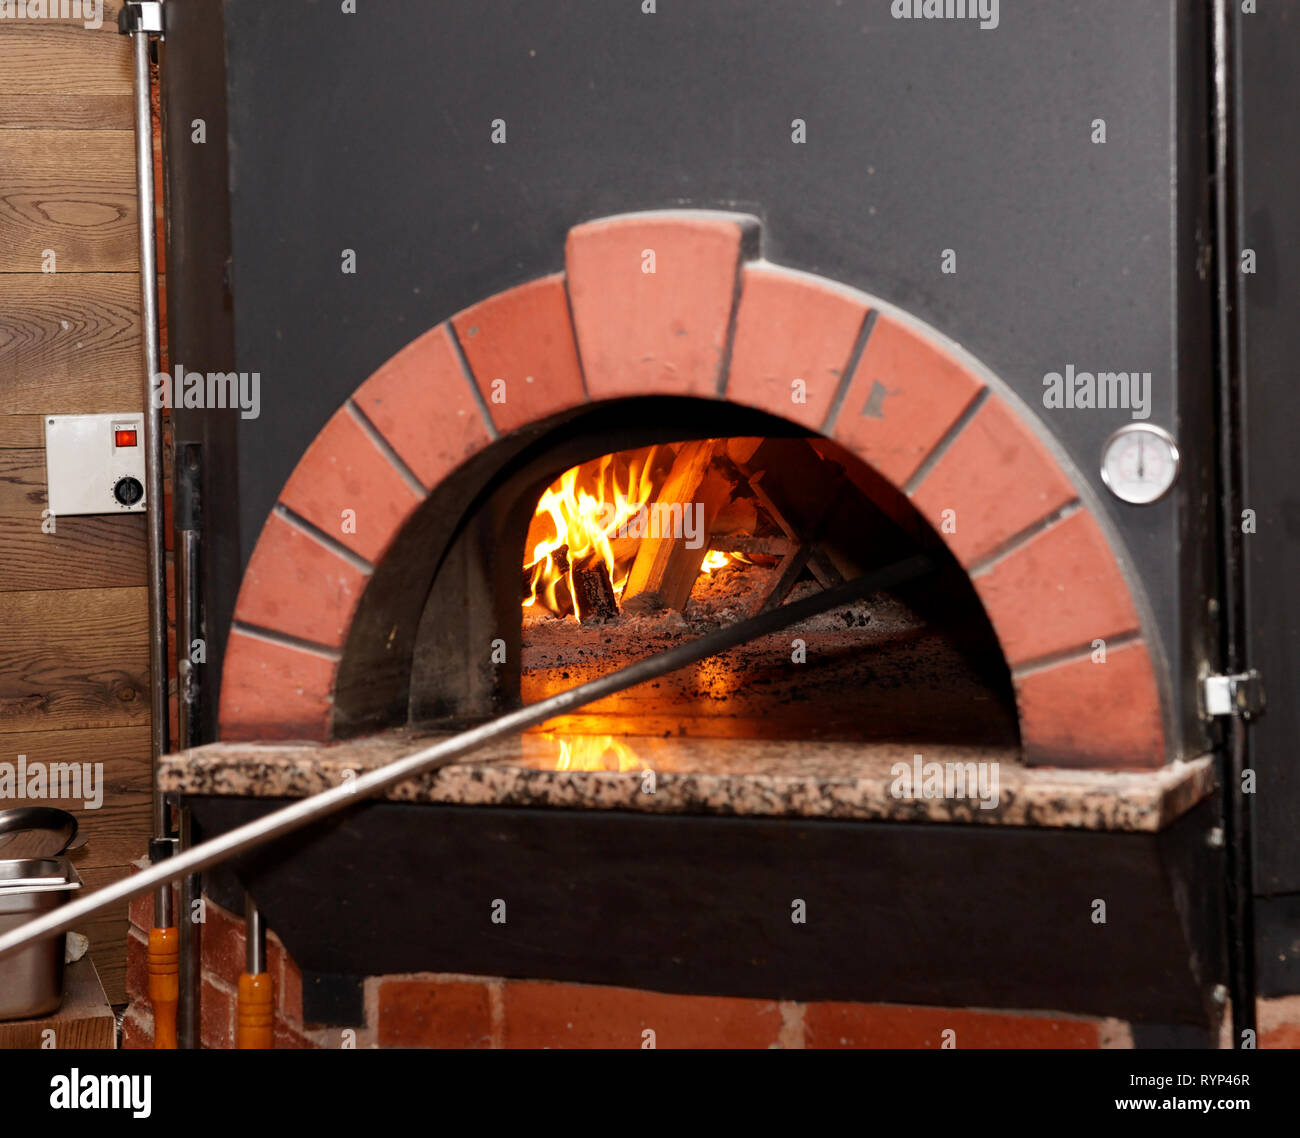 Pizza oven with wood burning inside it Stock Photo